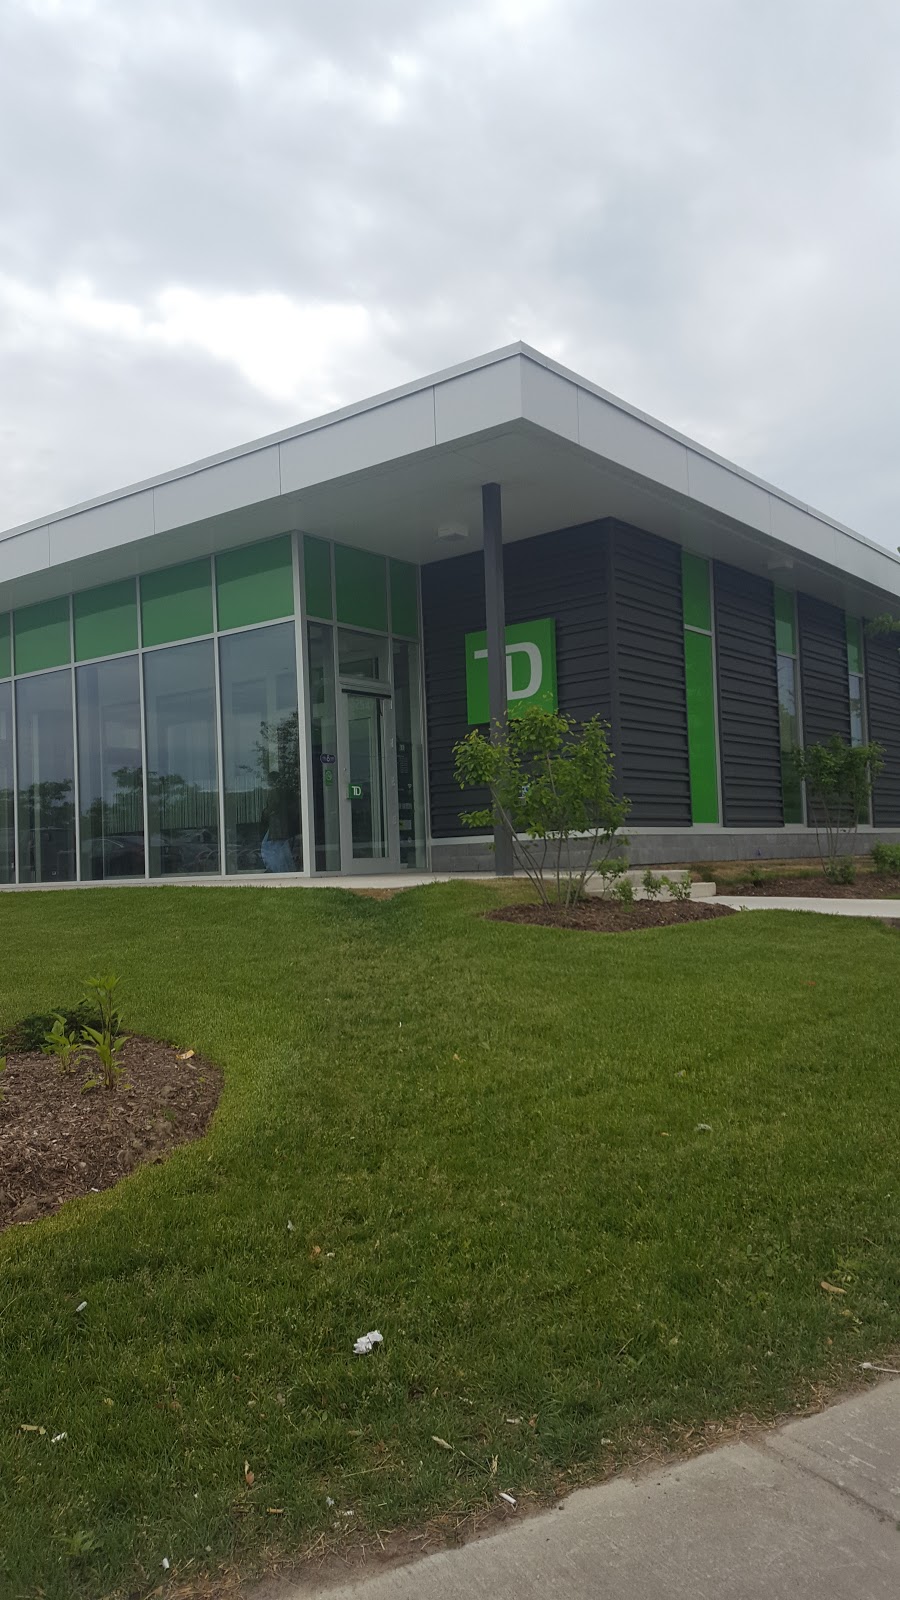 TD Canada Trust Branch and ATM | atm | 2547 Weston Rd, York, ON M9N 2A7, Canada | 4162478276 OR +1 416-247-8276